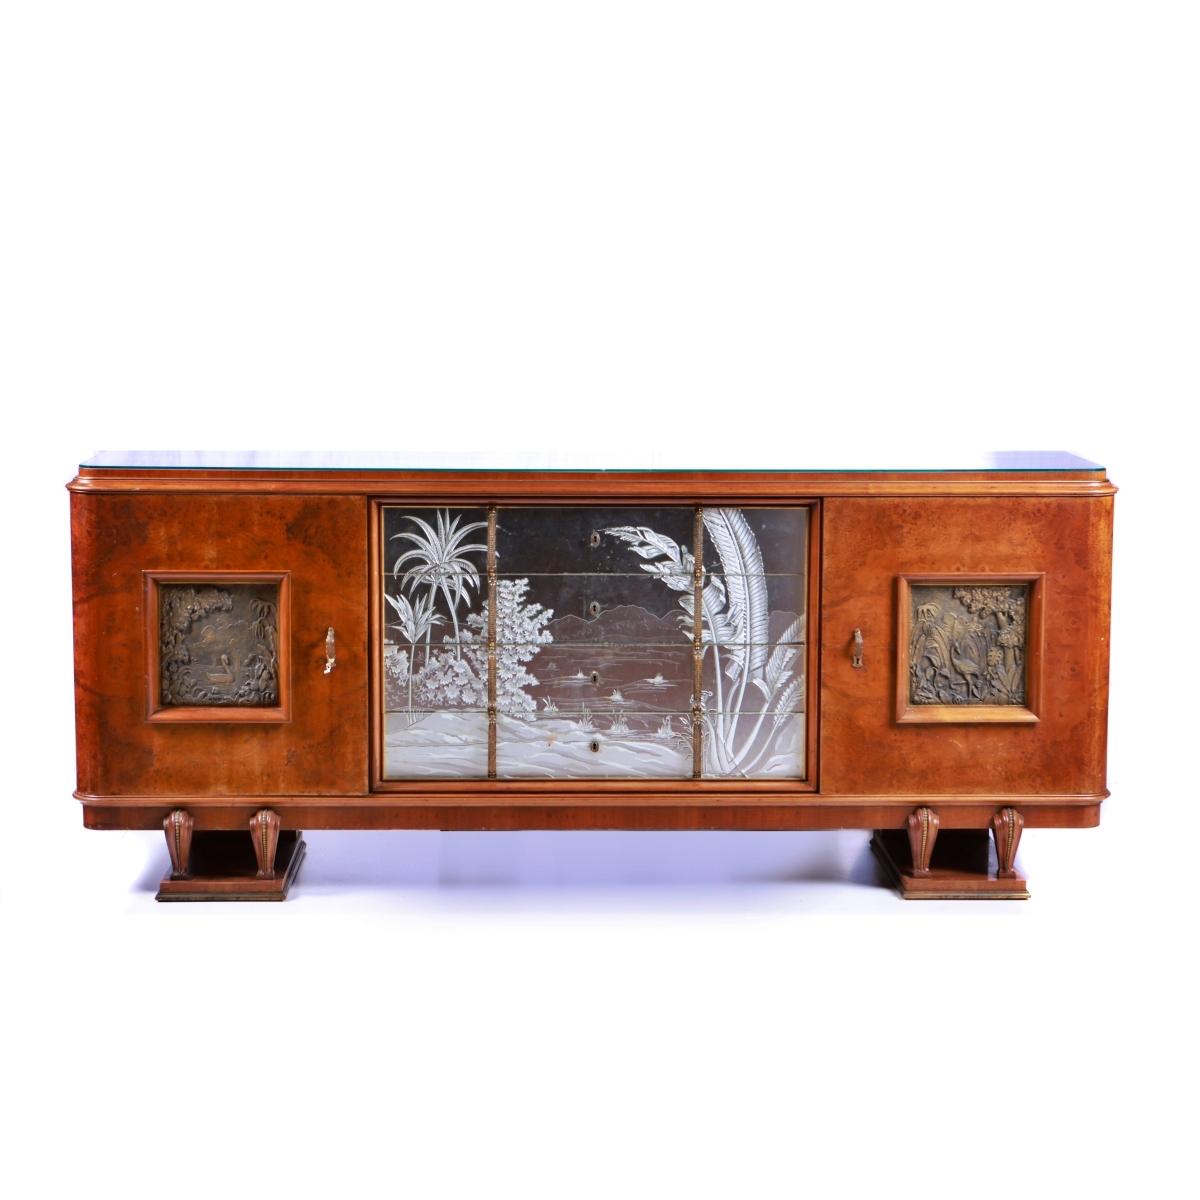 Wood Important French Art Deco Sideboard, Mid 20th Century For Sale